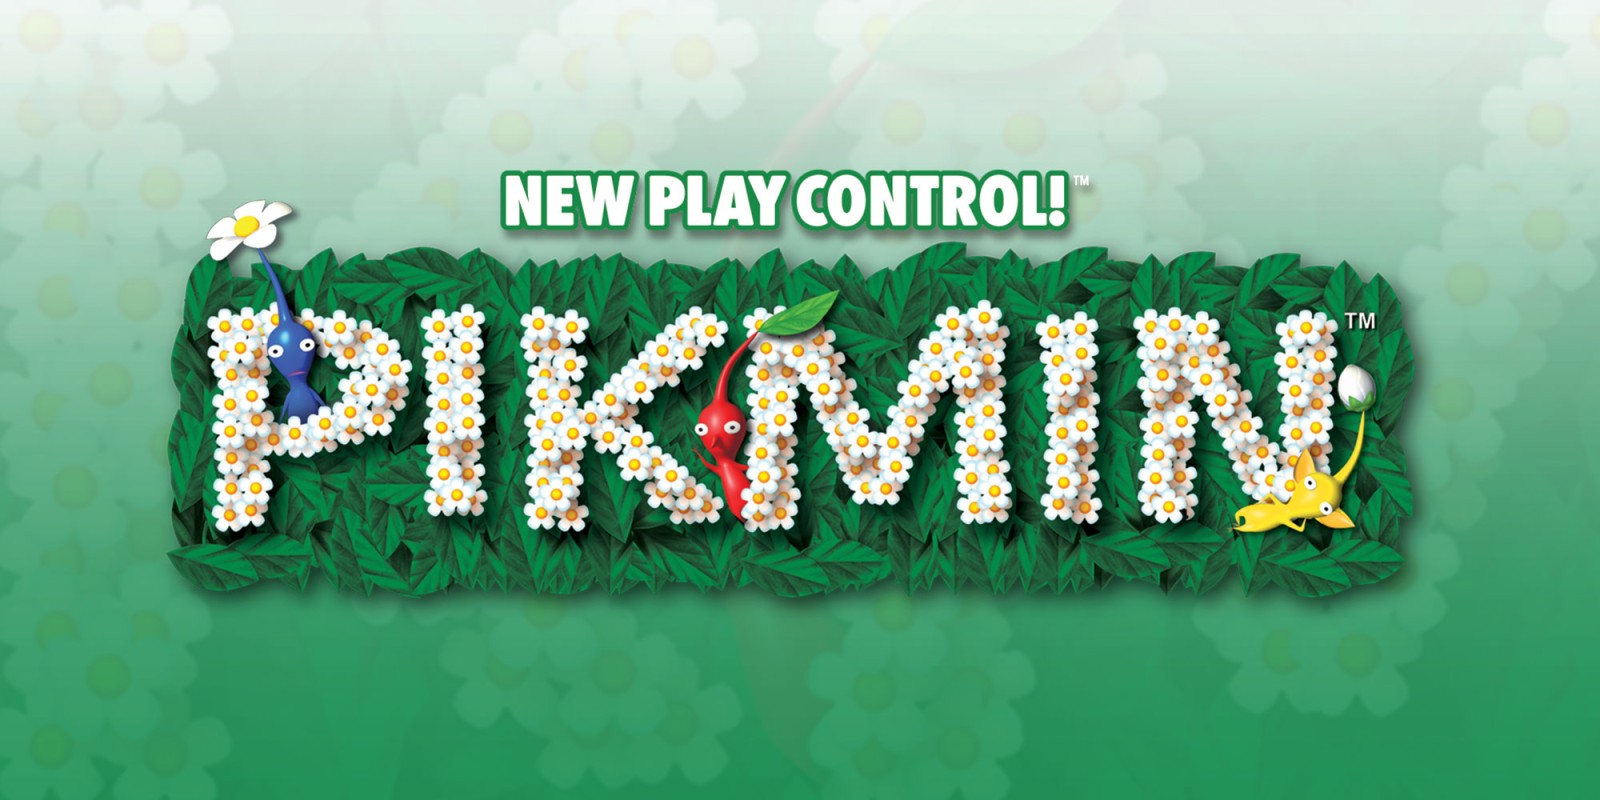 NEW PLAY CONTROL! Pikmin